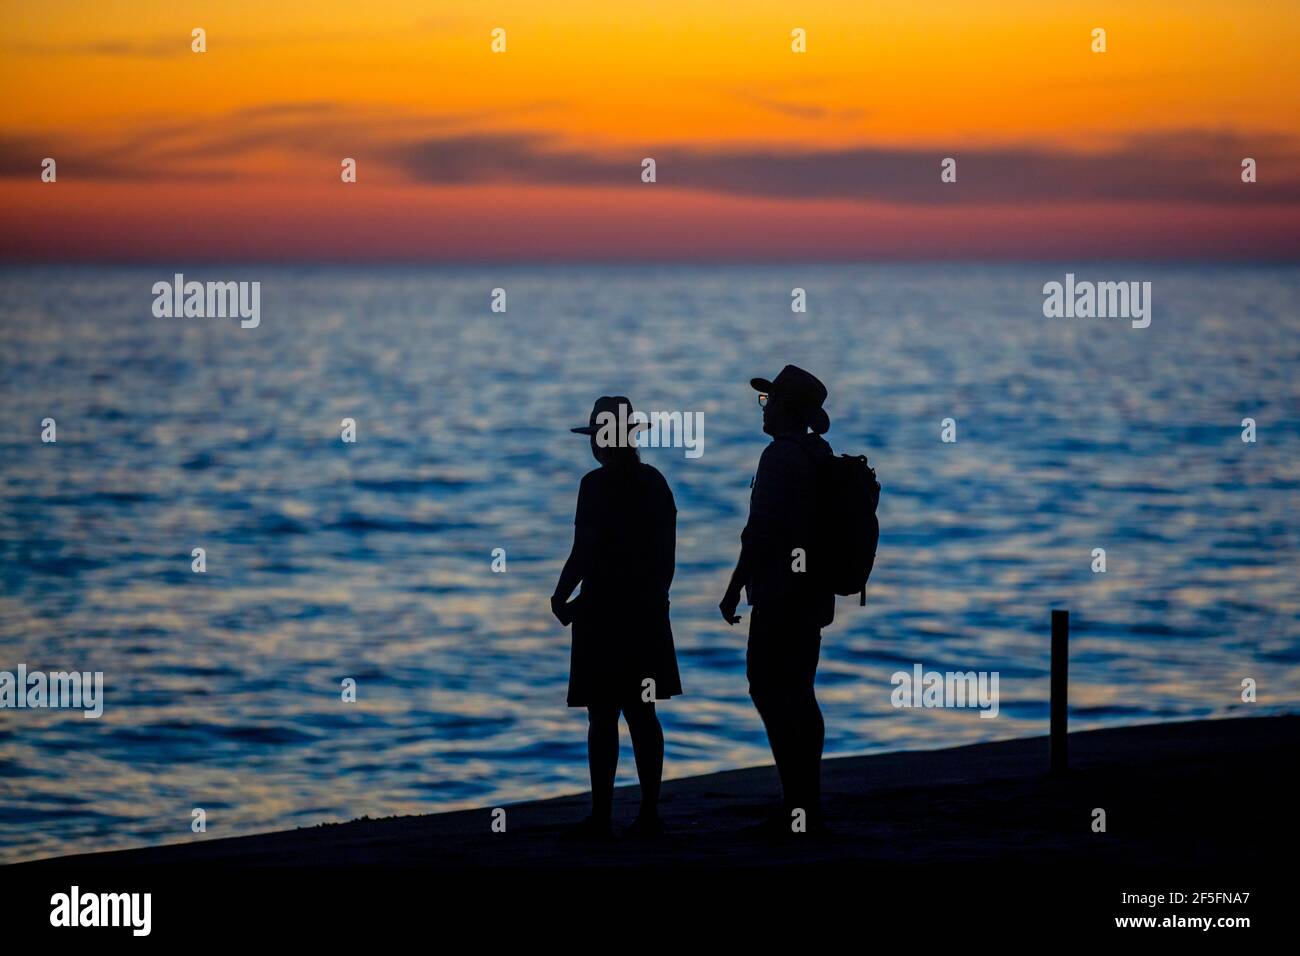 Silhouette of Mexican couple watching the sunset over the North Pacific Ocean from beach near Puerto Escondido, San Pedro Mixtepec, Oaxaca, Mexico Stock Photo